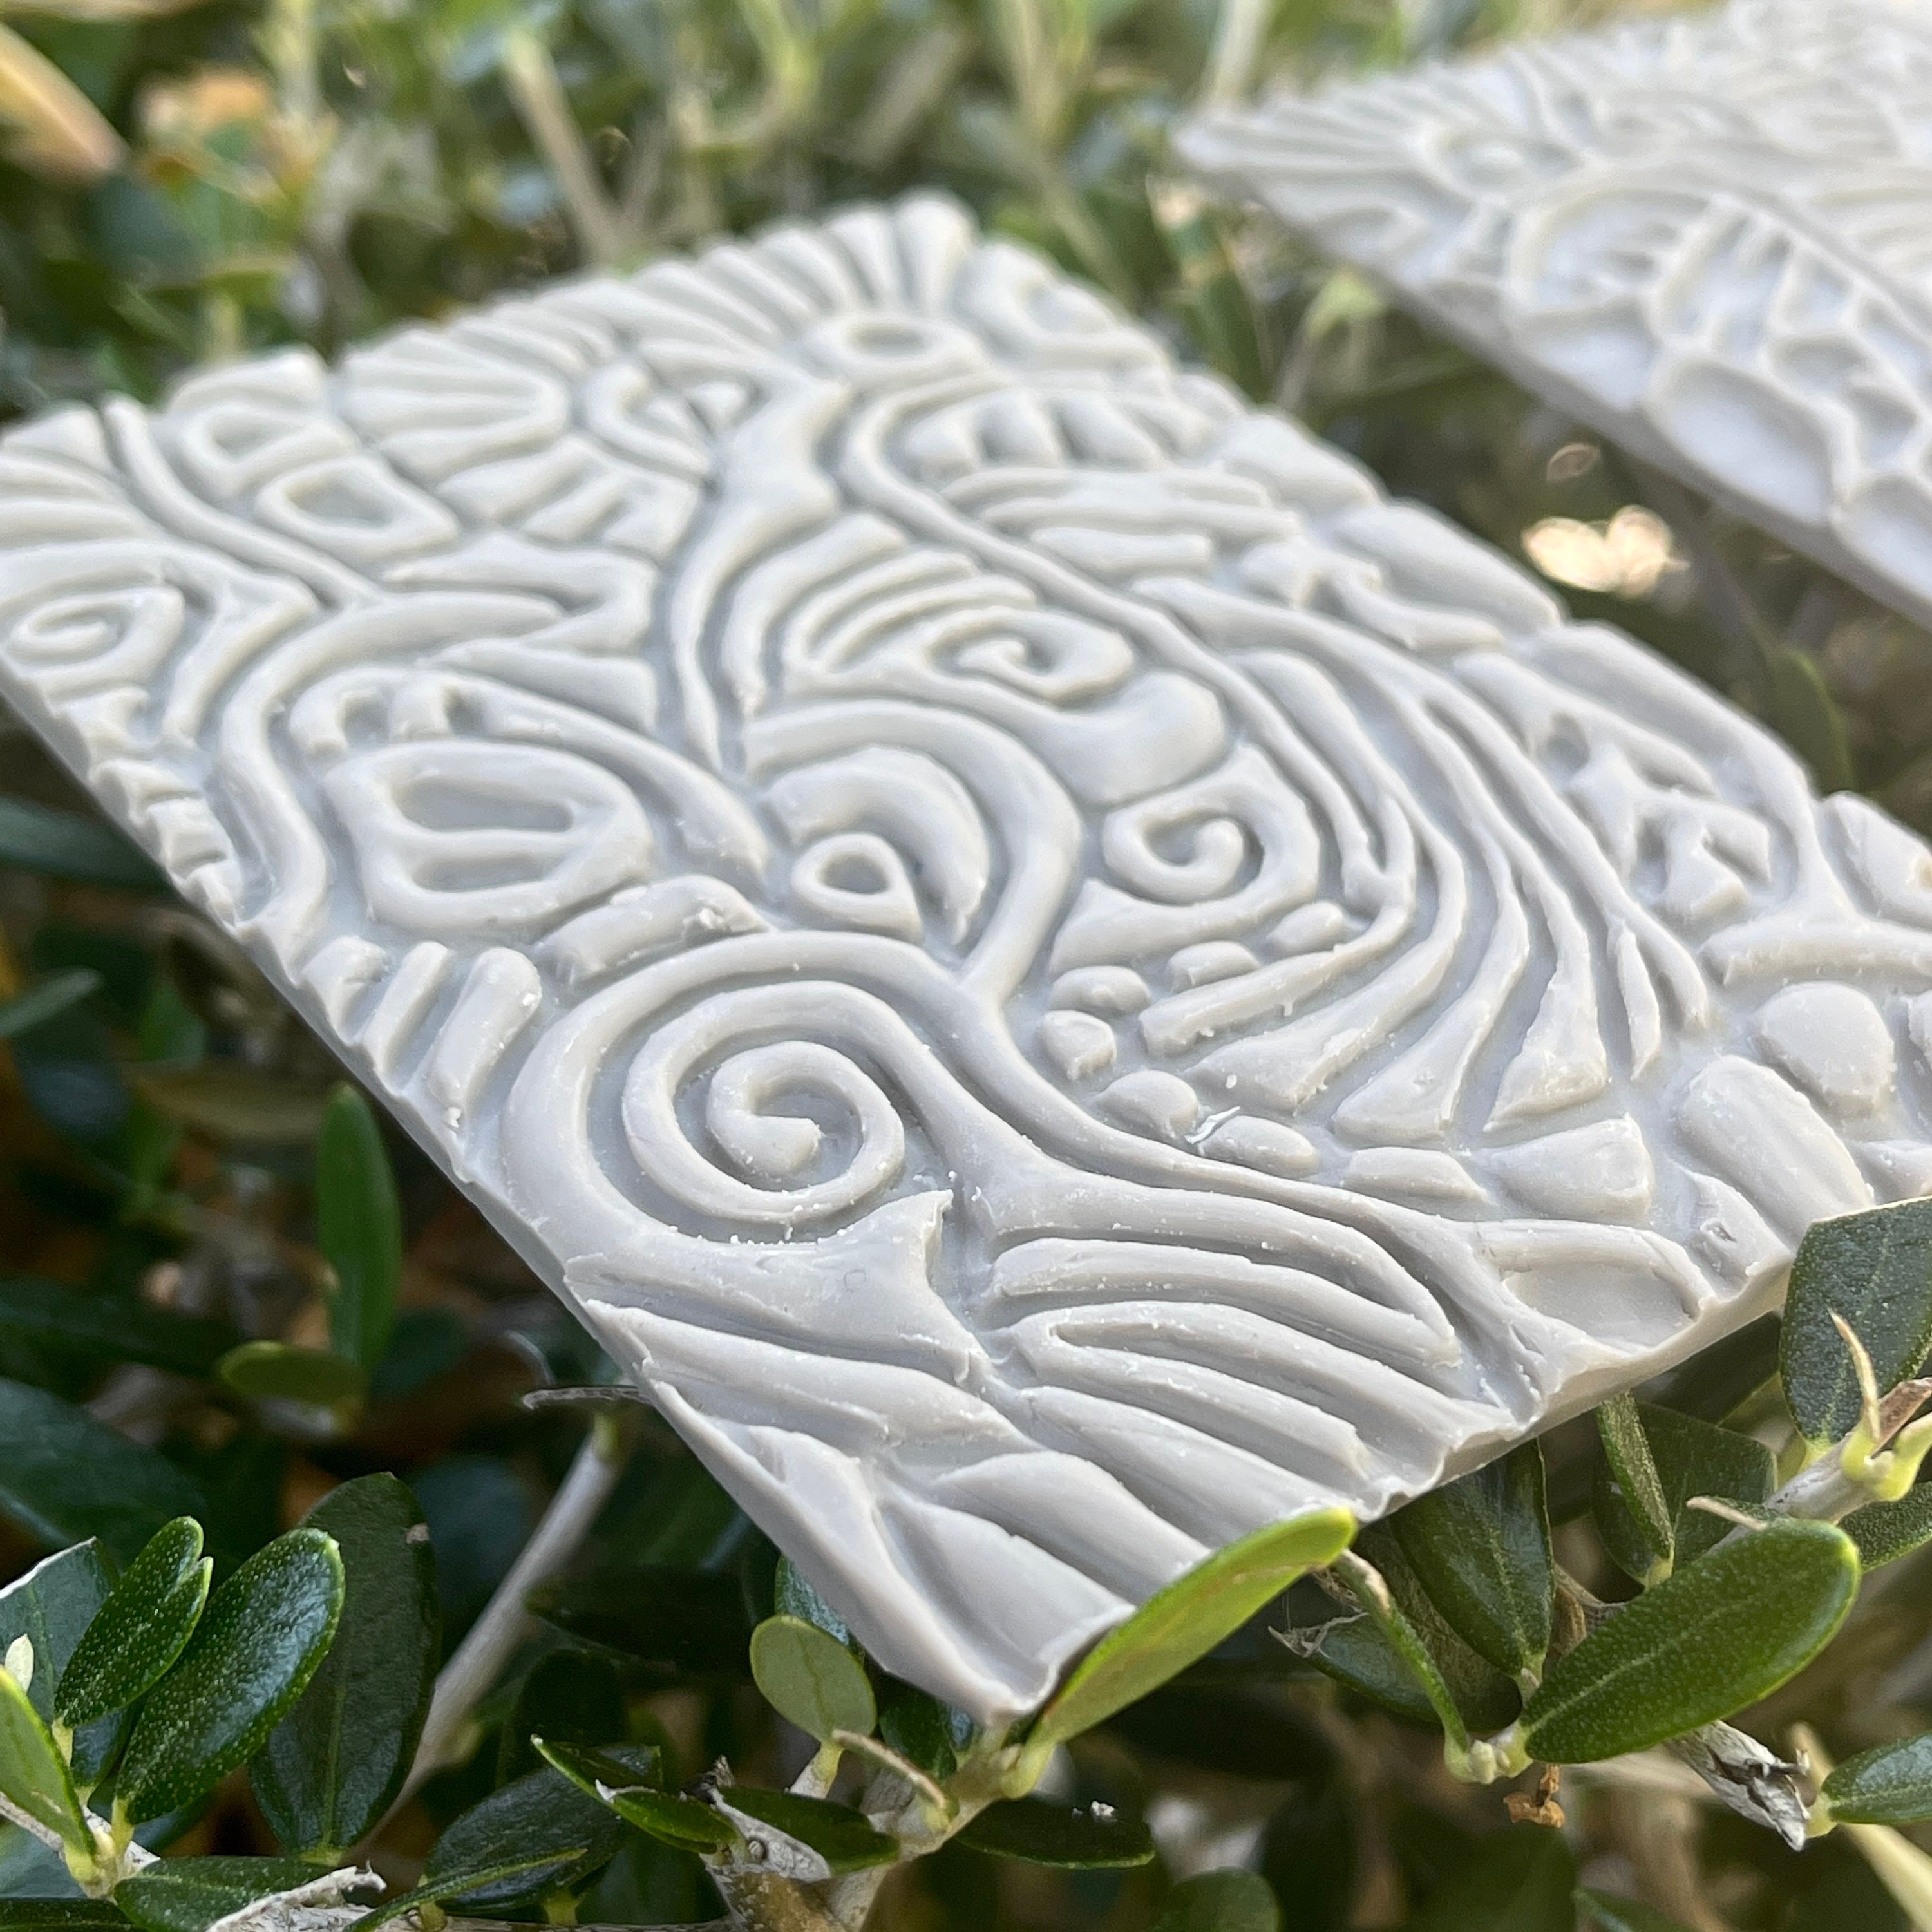 CLAY STAMP, POLYMER Clay Stamp, Embossing Stamp, Branches 02 Resin